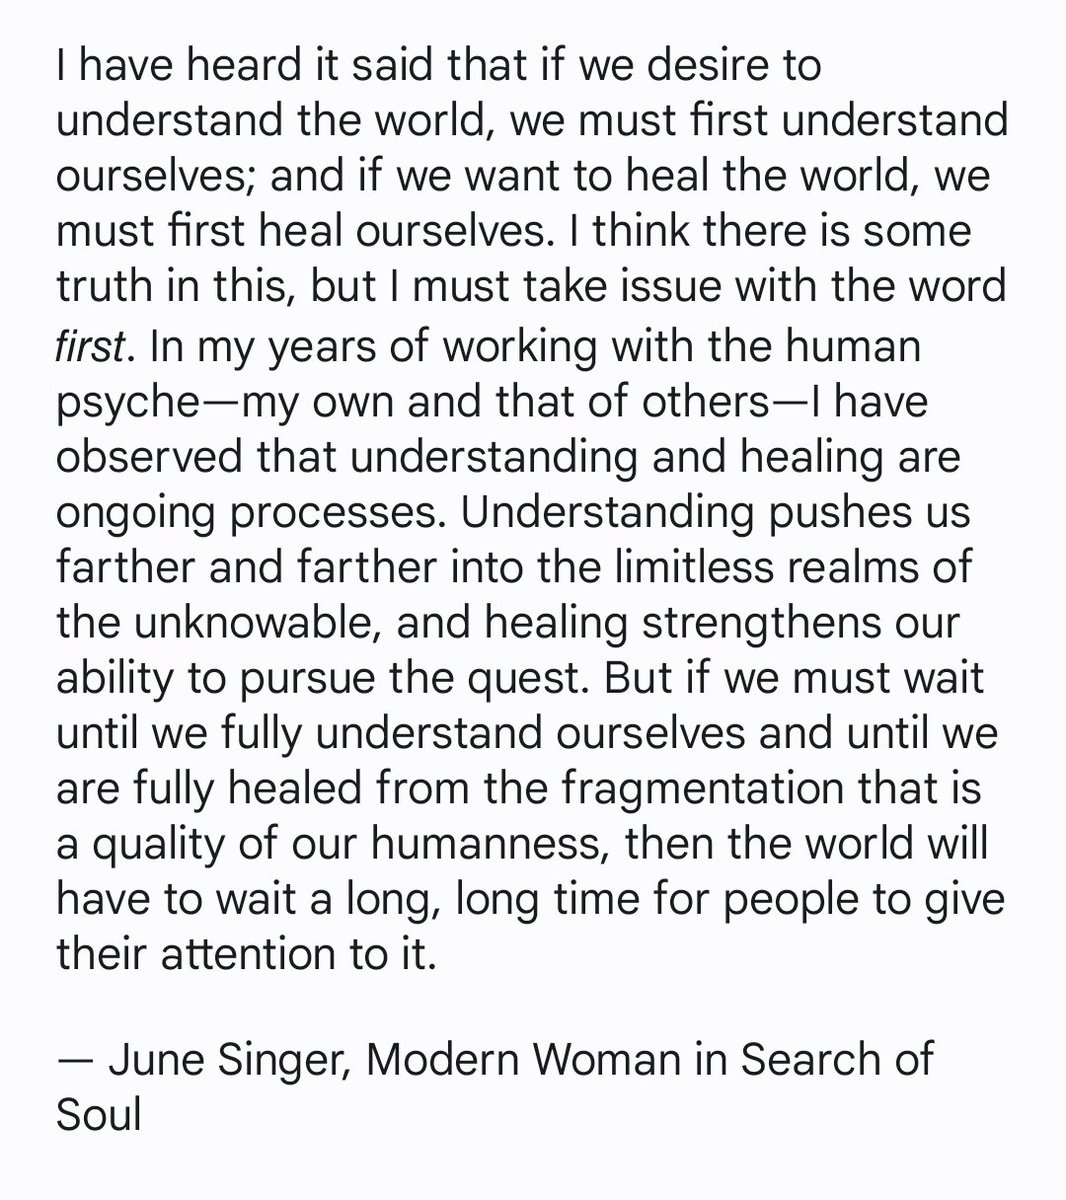 Author and Jungian analyst, June Singer on the ongoing processes of 𝘶𝘯𝘥𝘦𝘳𝘴𝘵𝘢𝘯𝘥𝘪𝘯𝘨 and 𝘩𝘦𝘢𝘭𝘪𝘯𝘨.